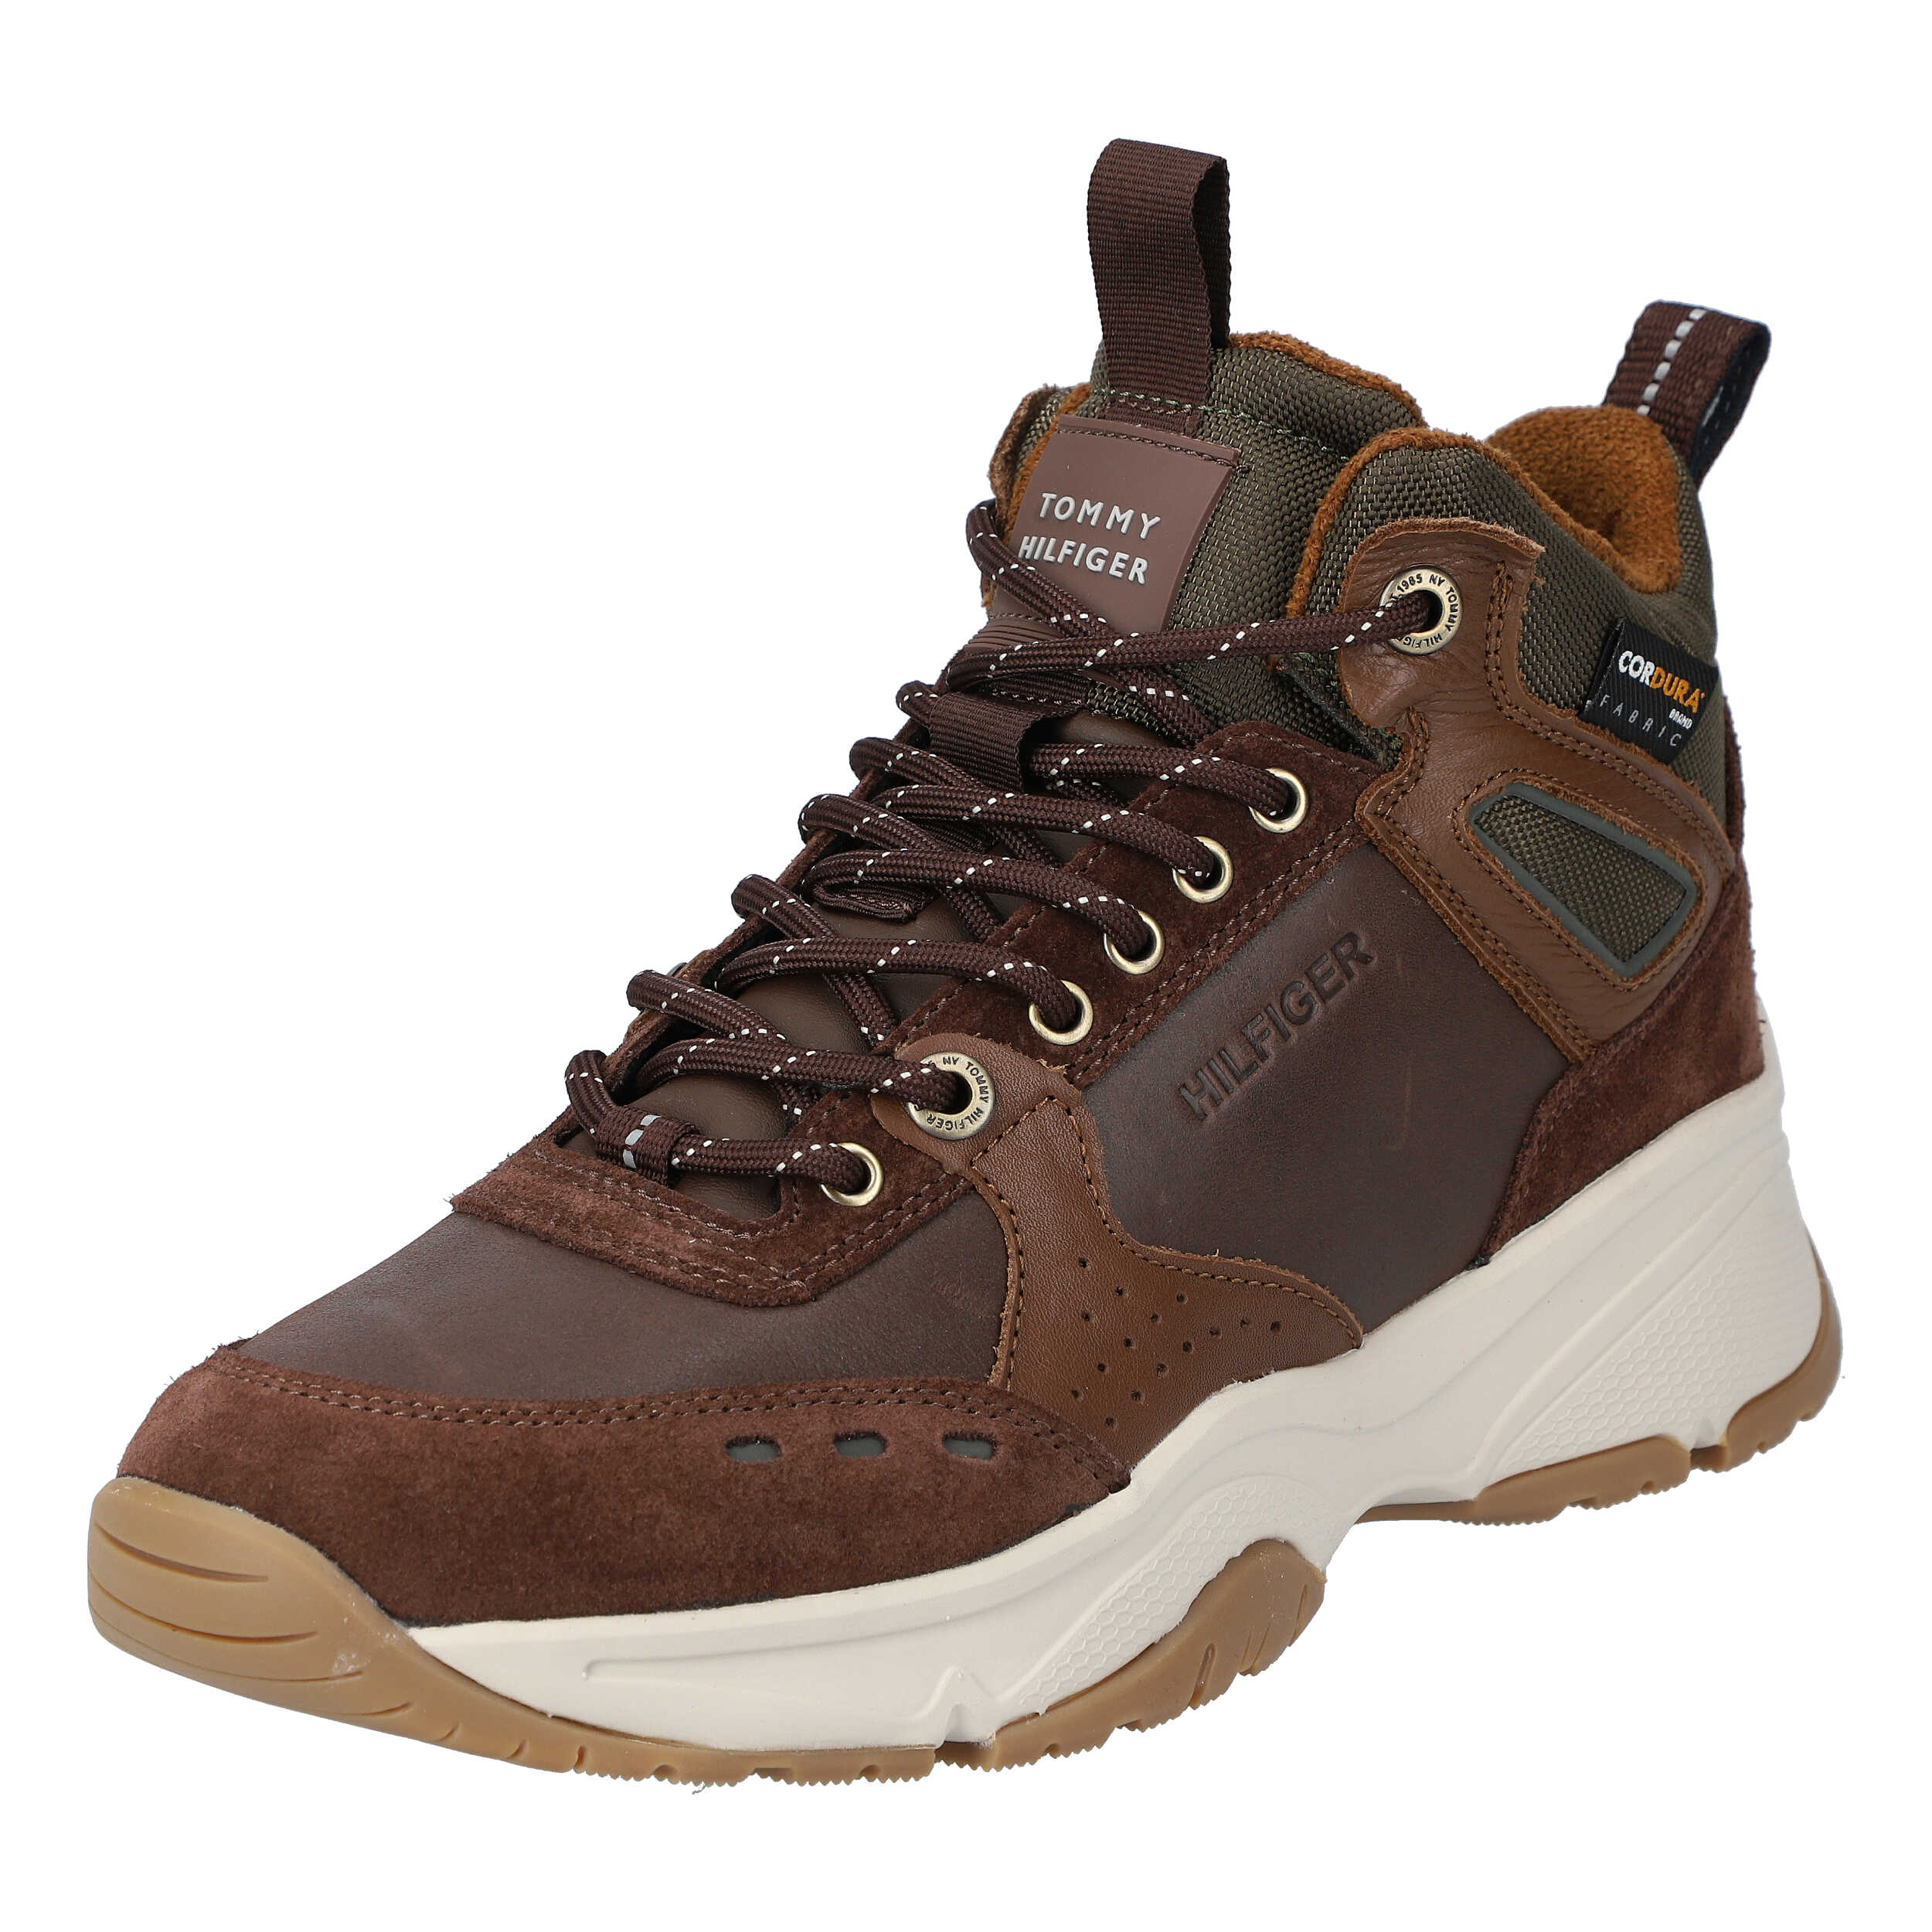 High Sneaker Boot Leather